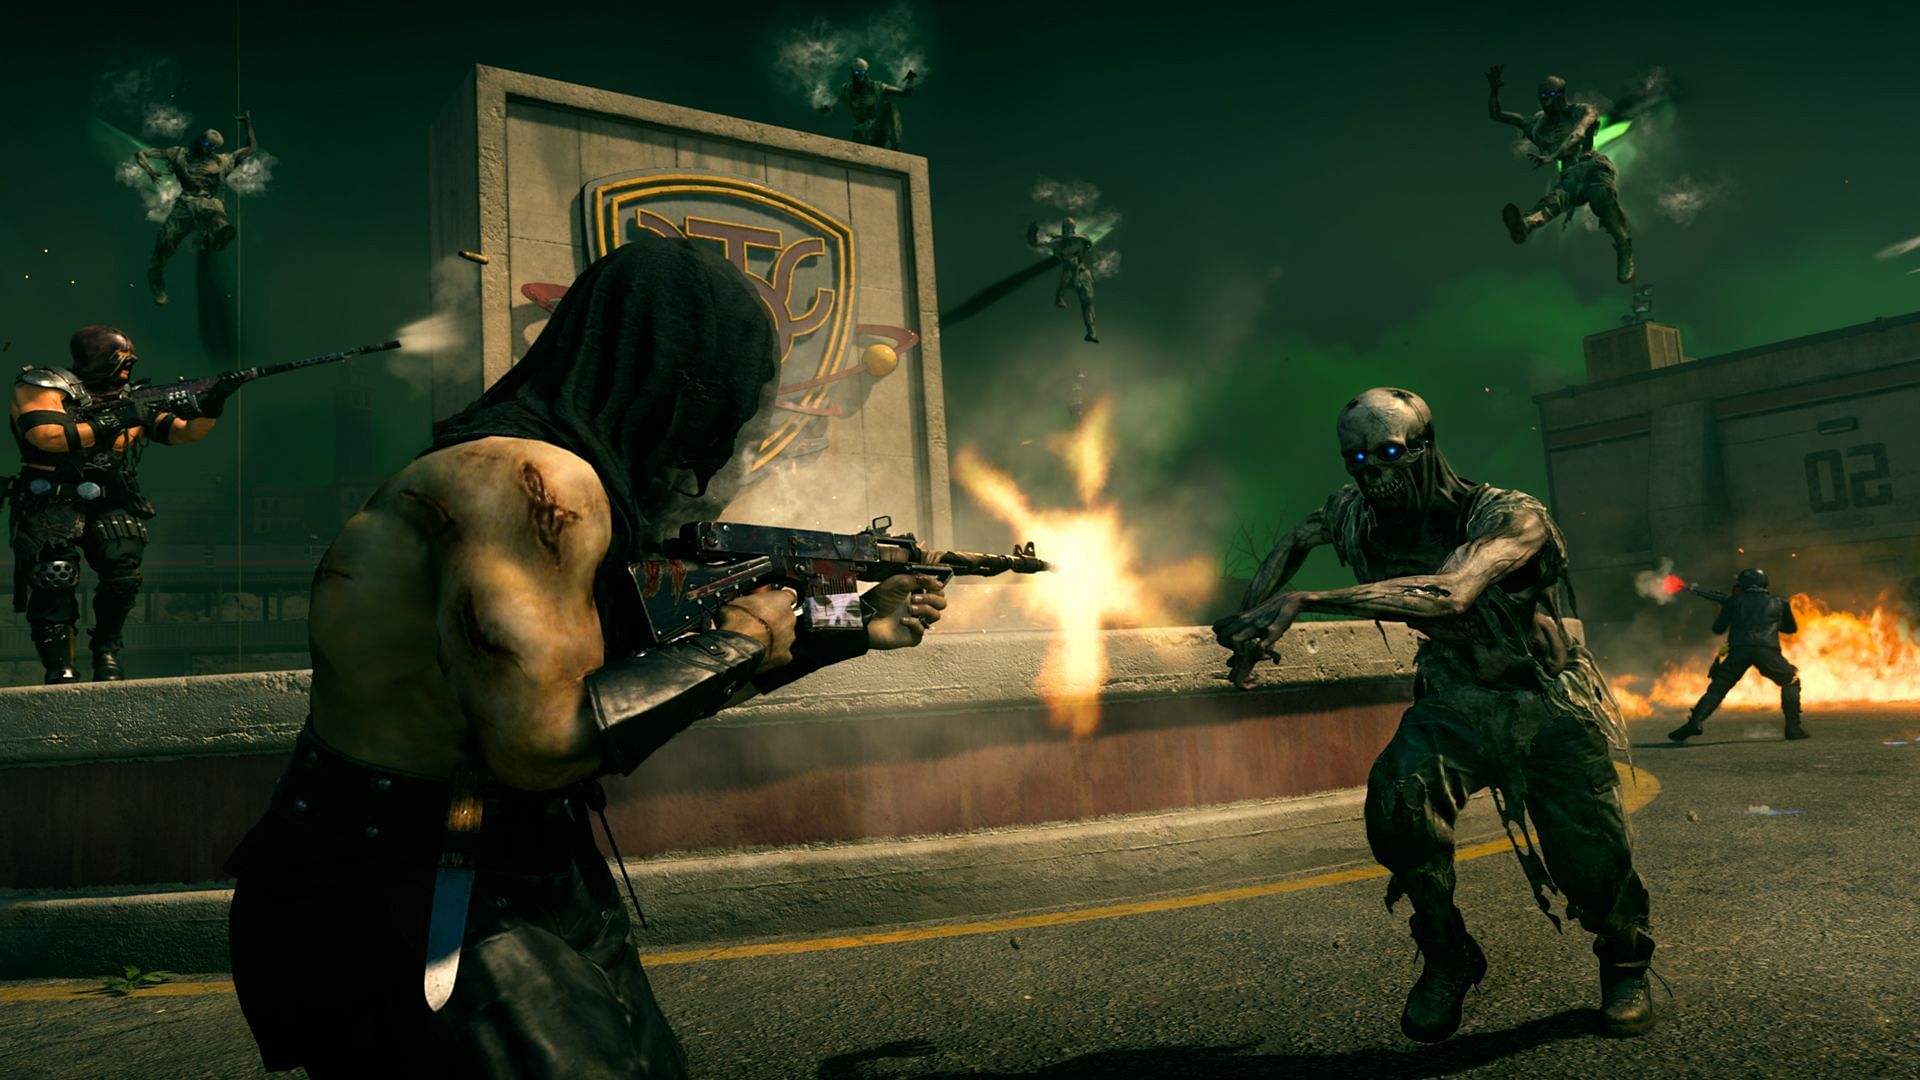 Modern Warfare 3 Zombies revolutionises a legacy of undead FPS